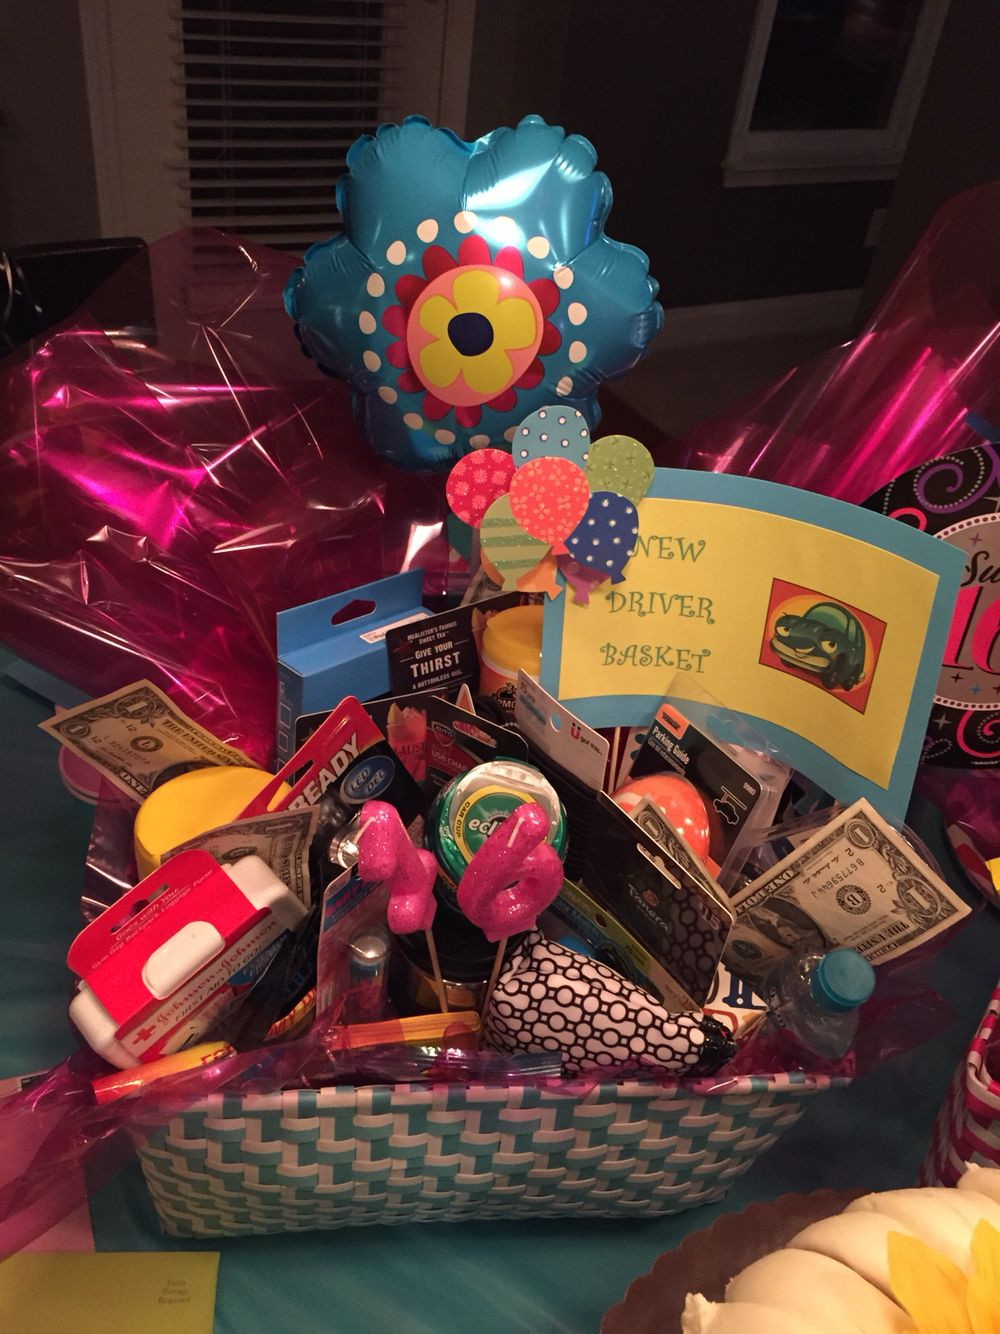 16Th Birthday Gift Ideas For Girls
 Sweet Sixteen New Driver Basket Gifts